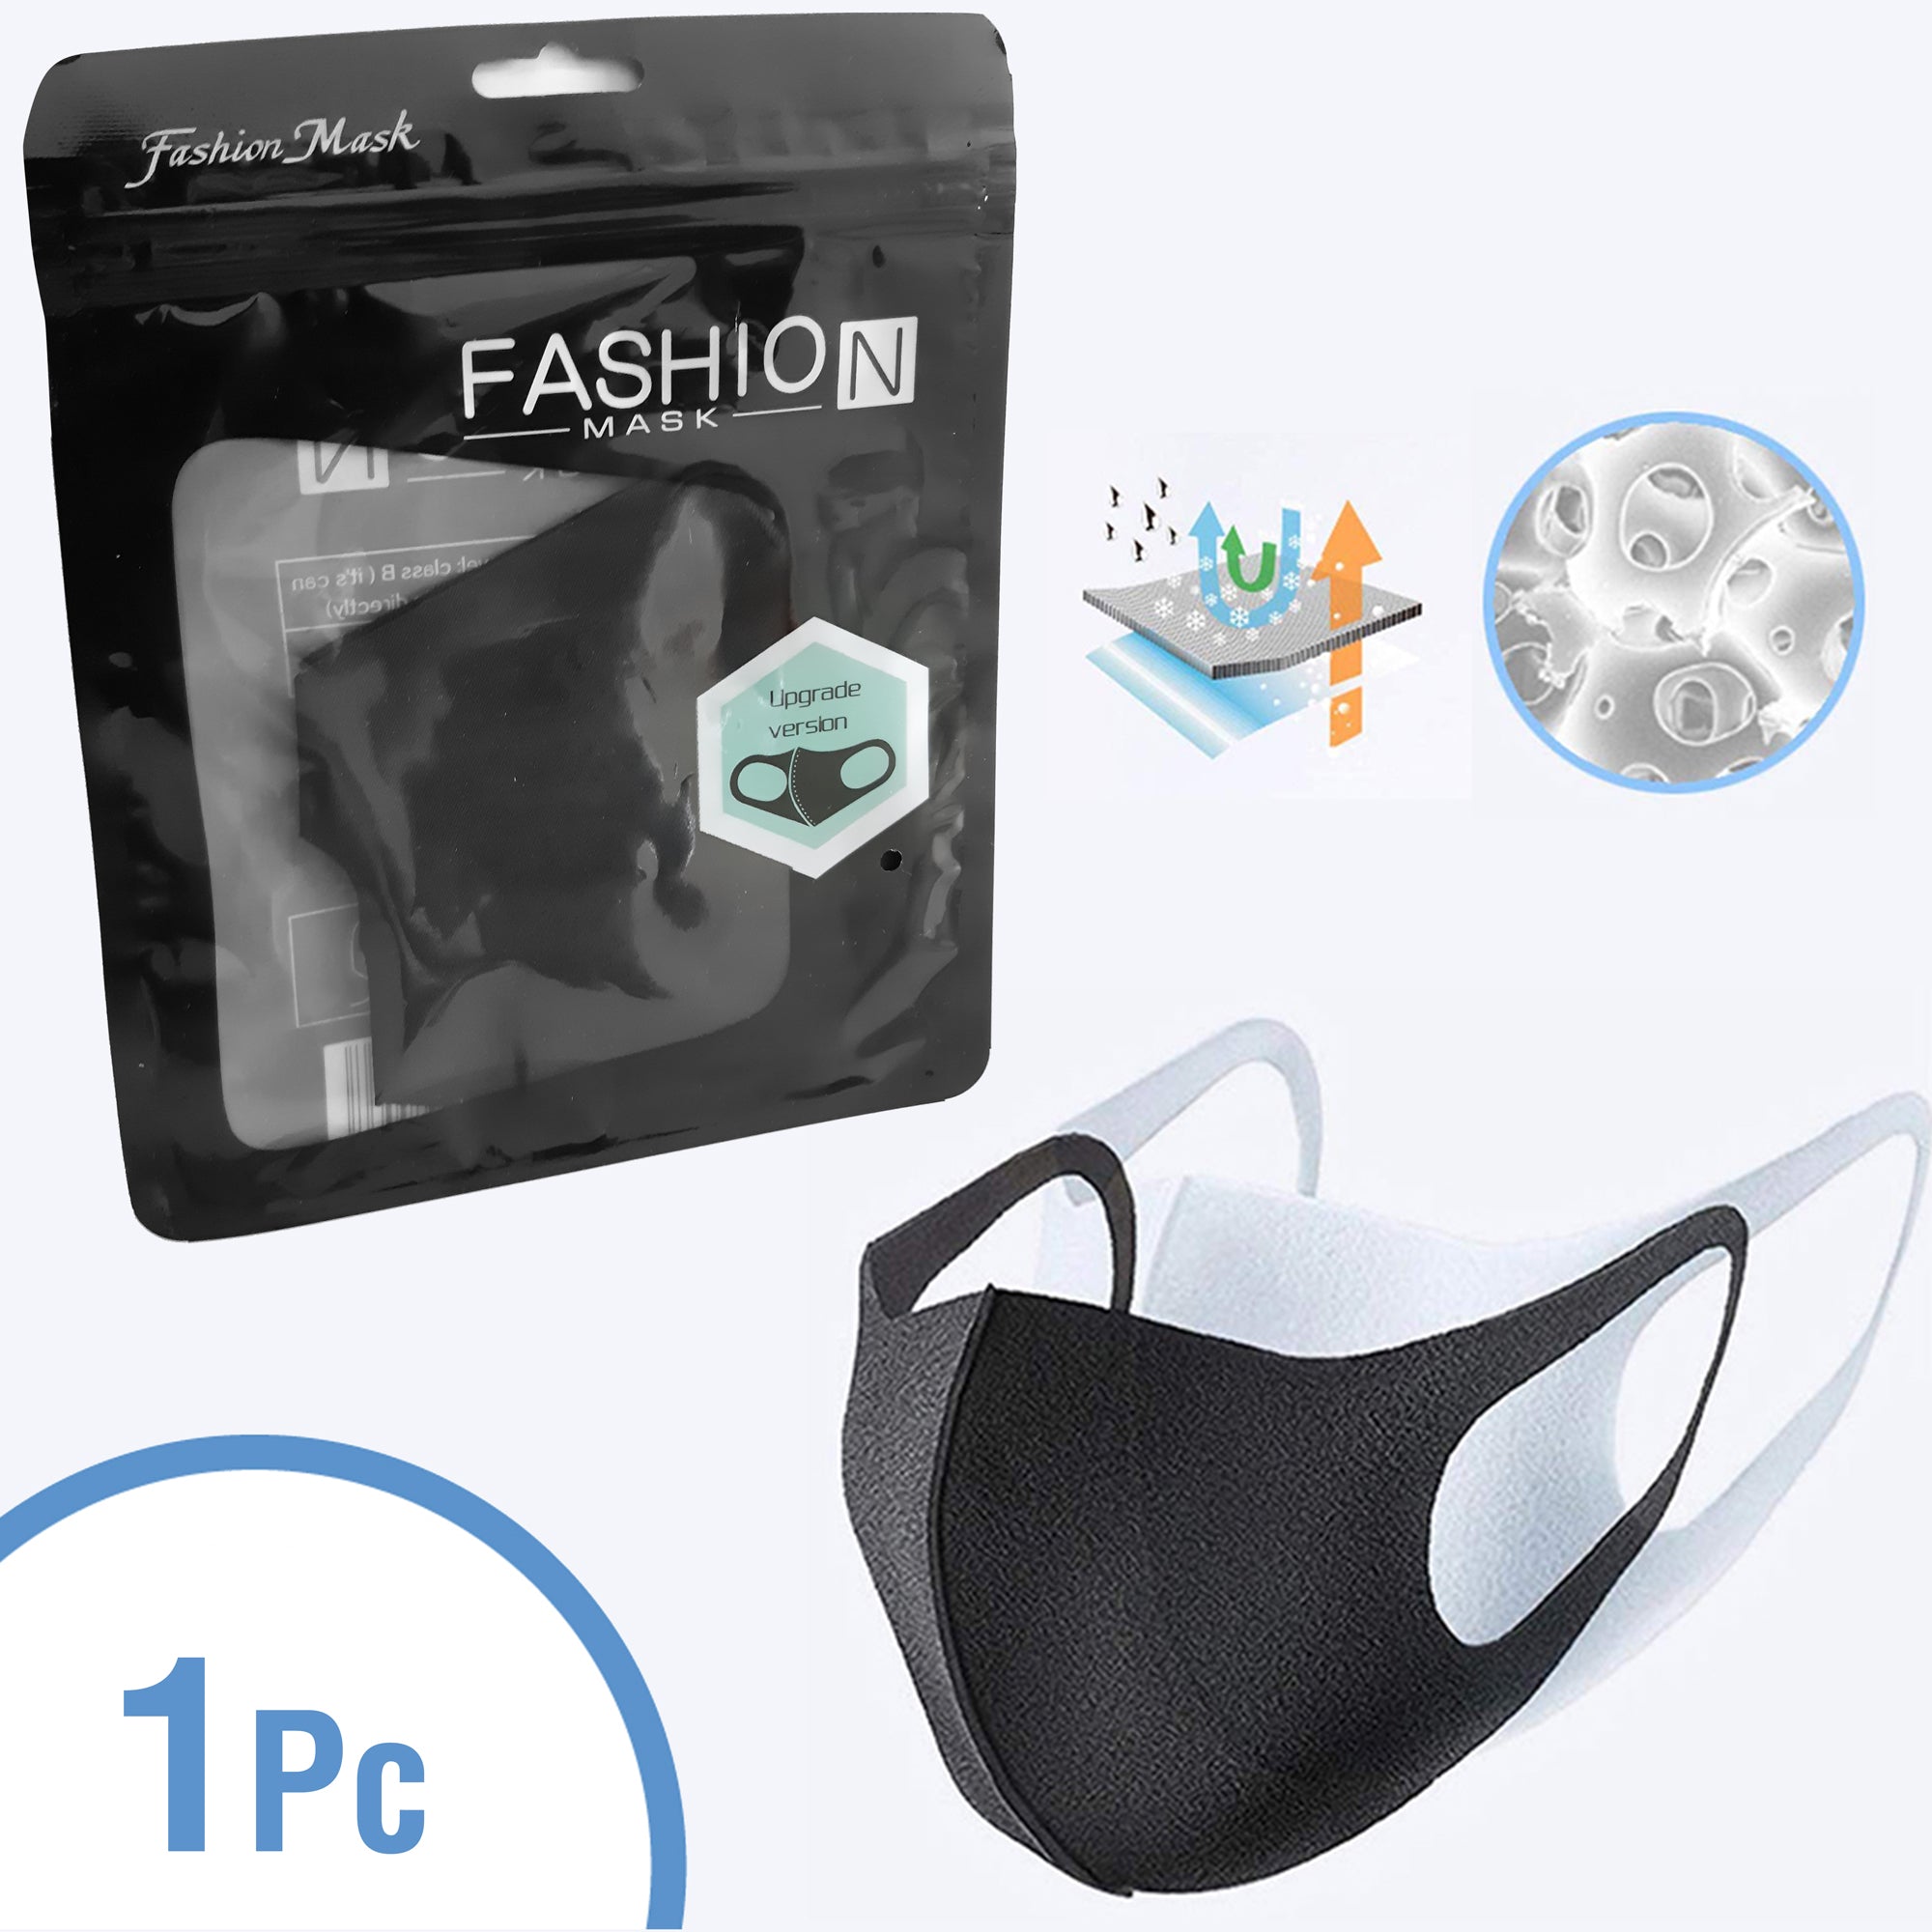 1 PC Fashion Mask, Reusable and Washable (FZ/T73049-2014 Certified)